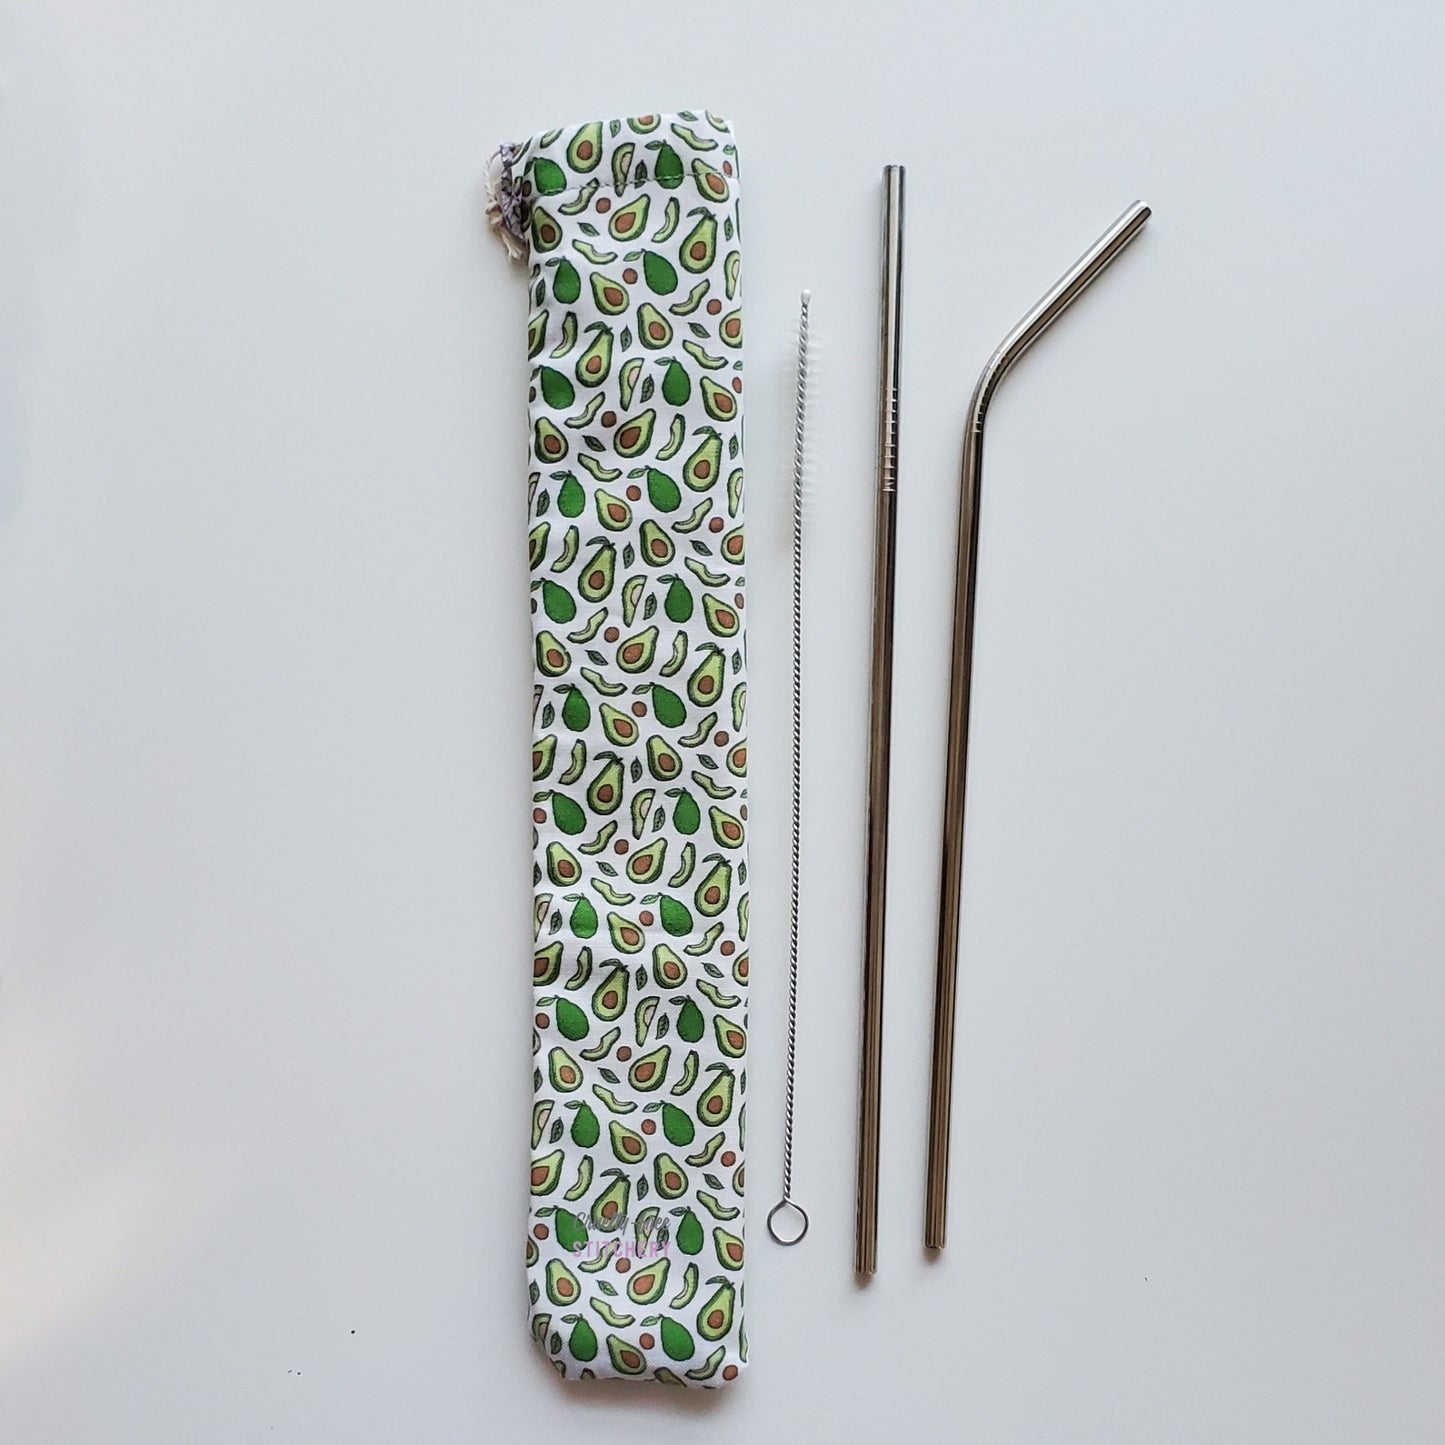 Reusable straw pouch in the same avocado print laying vertically next to a straw cleaner brush, a straight stainless steel straw, and a bent stainless steel straw.